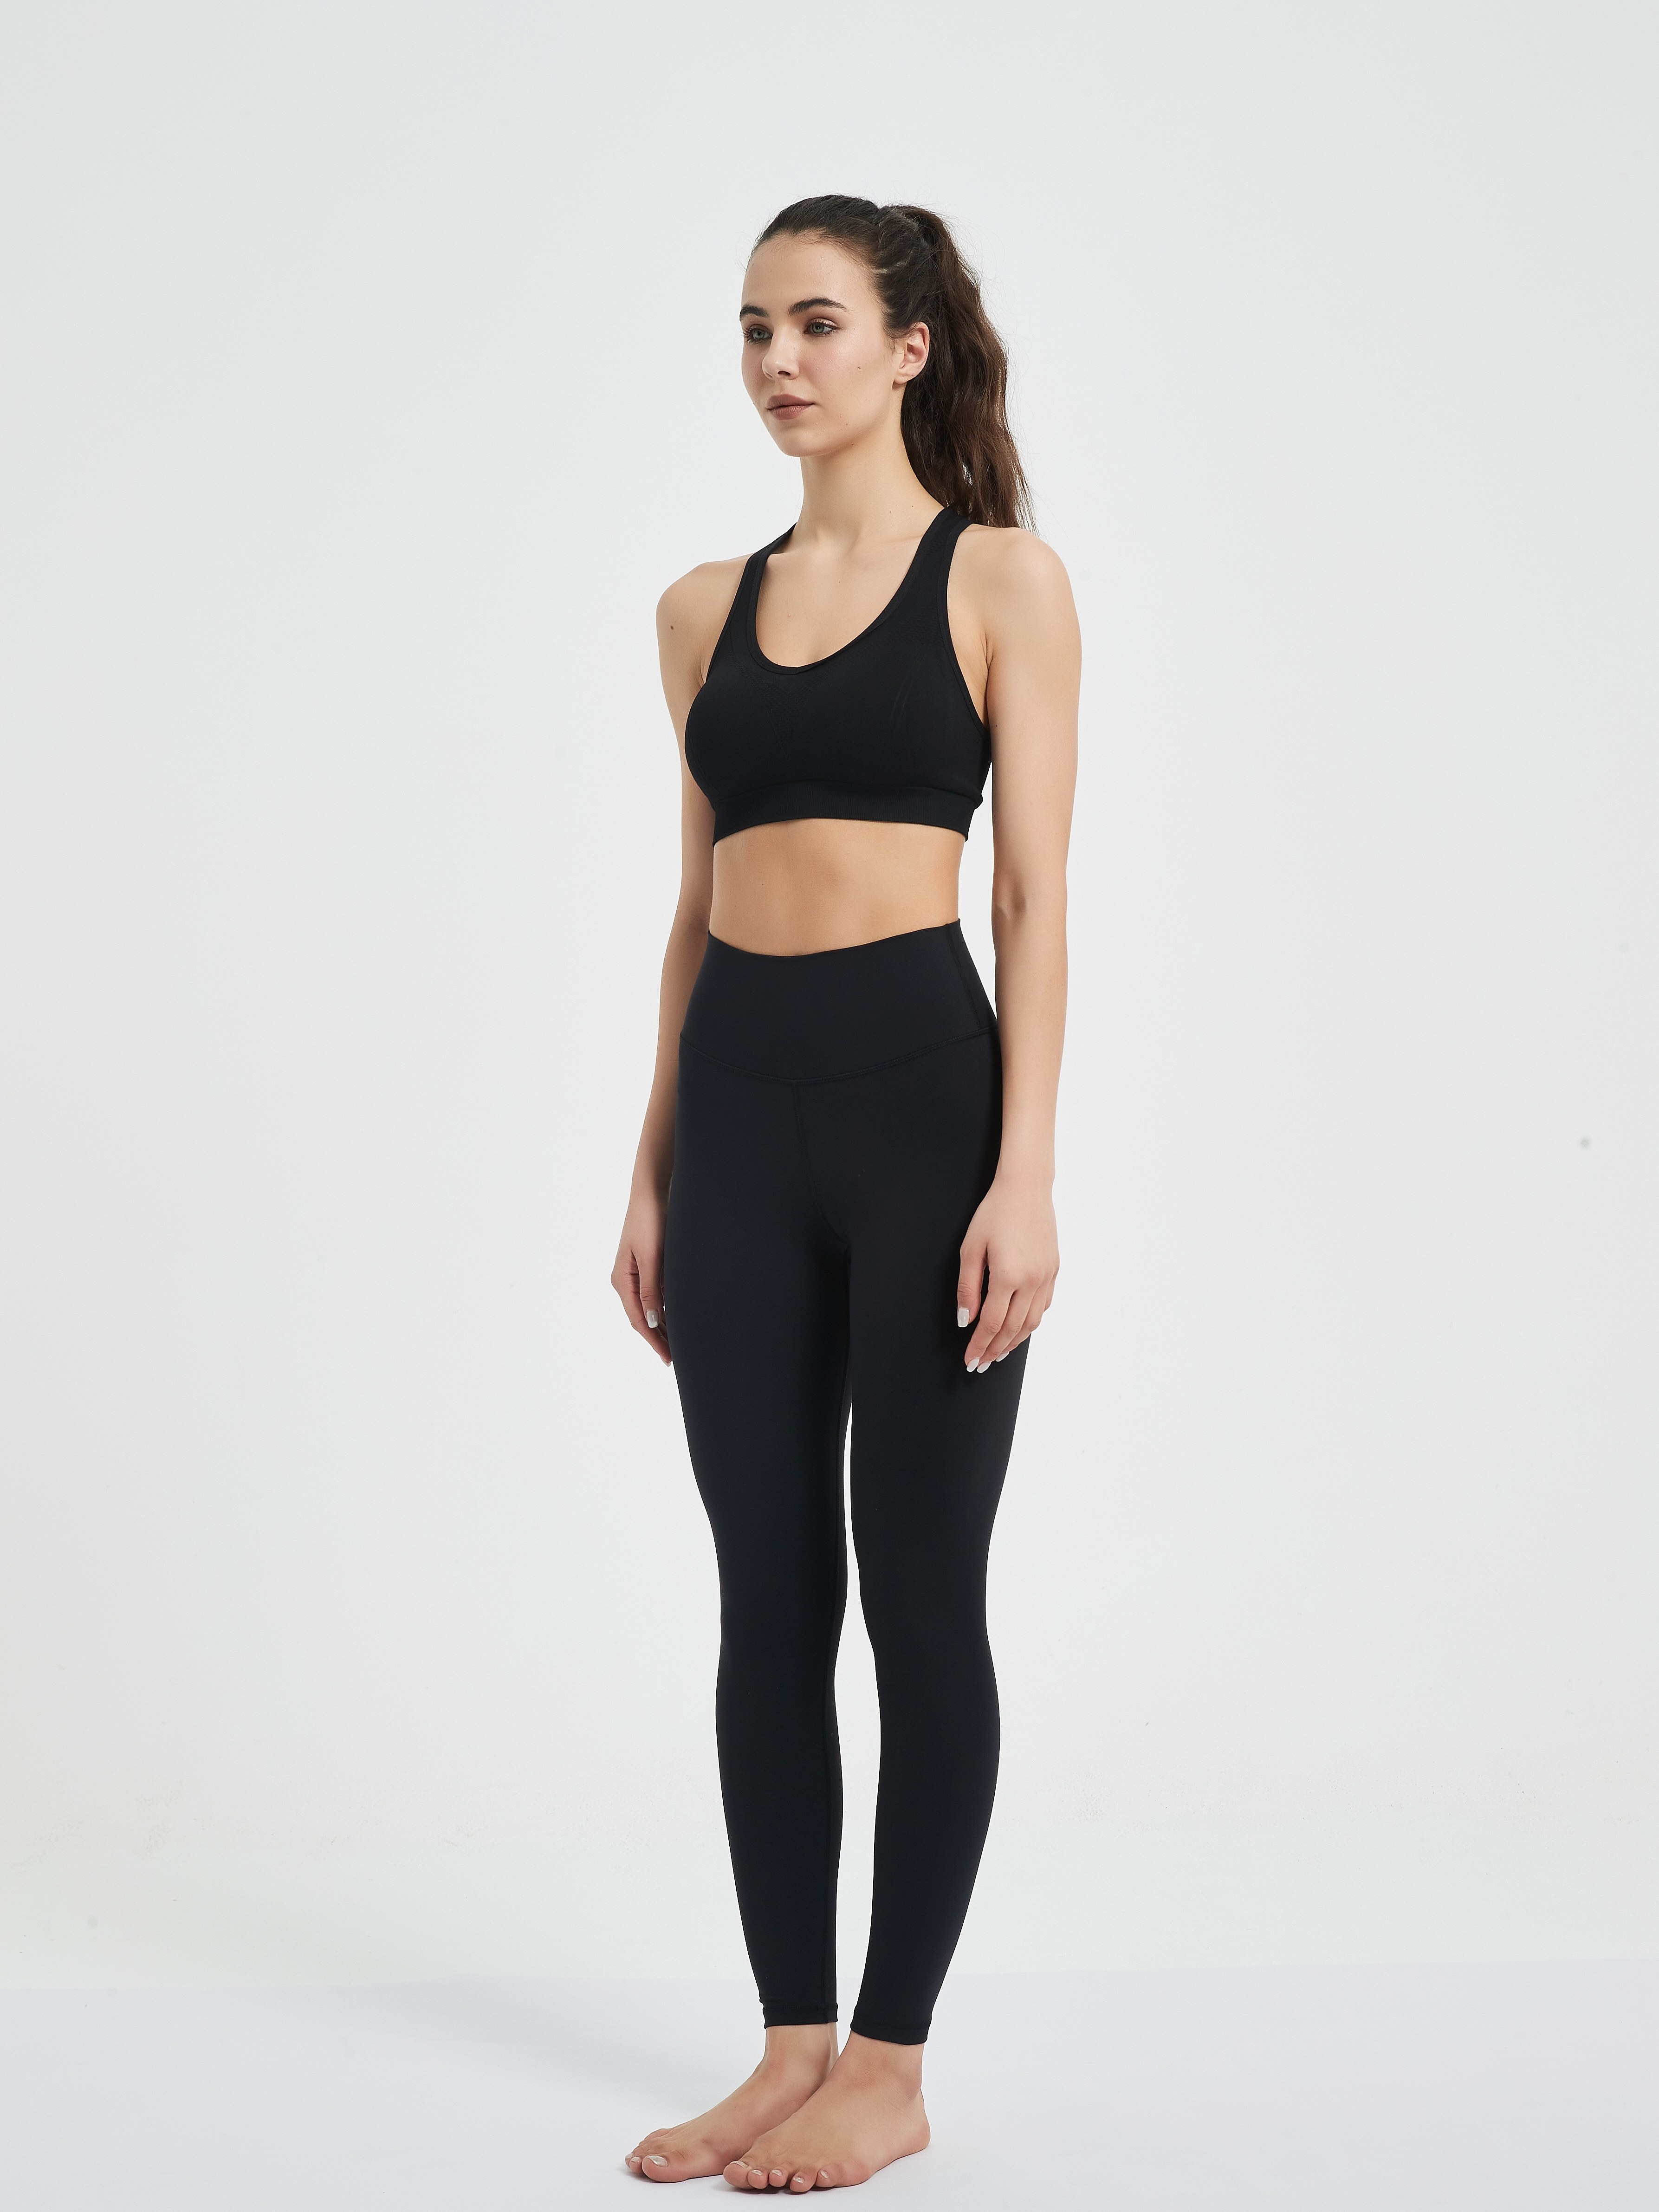 Women Casual Outfits High Waist Leggings And Sports Bra Black